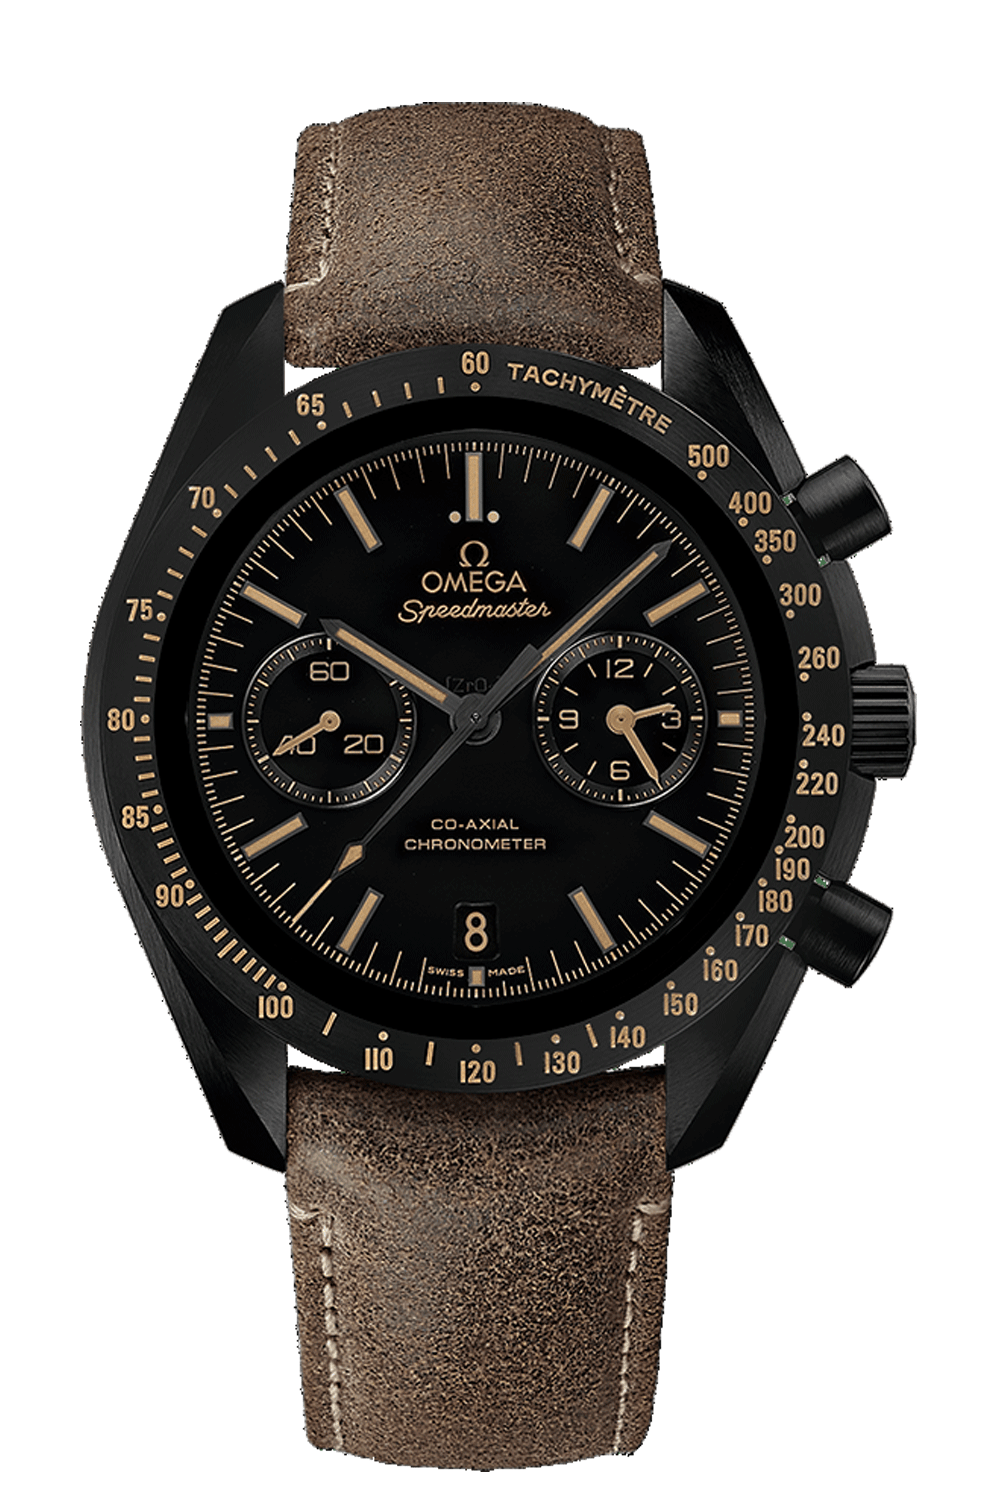 Speedmaster Moonwatch Omega Co-Axial Chronograph 44.25mm